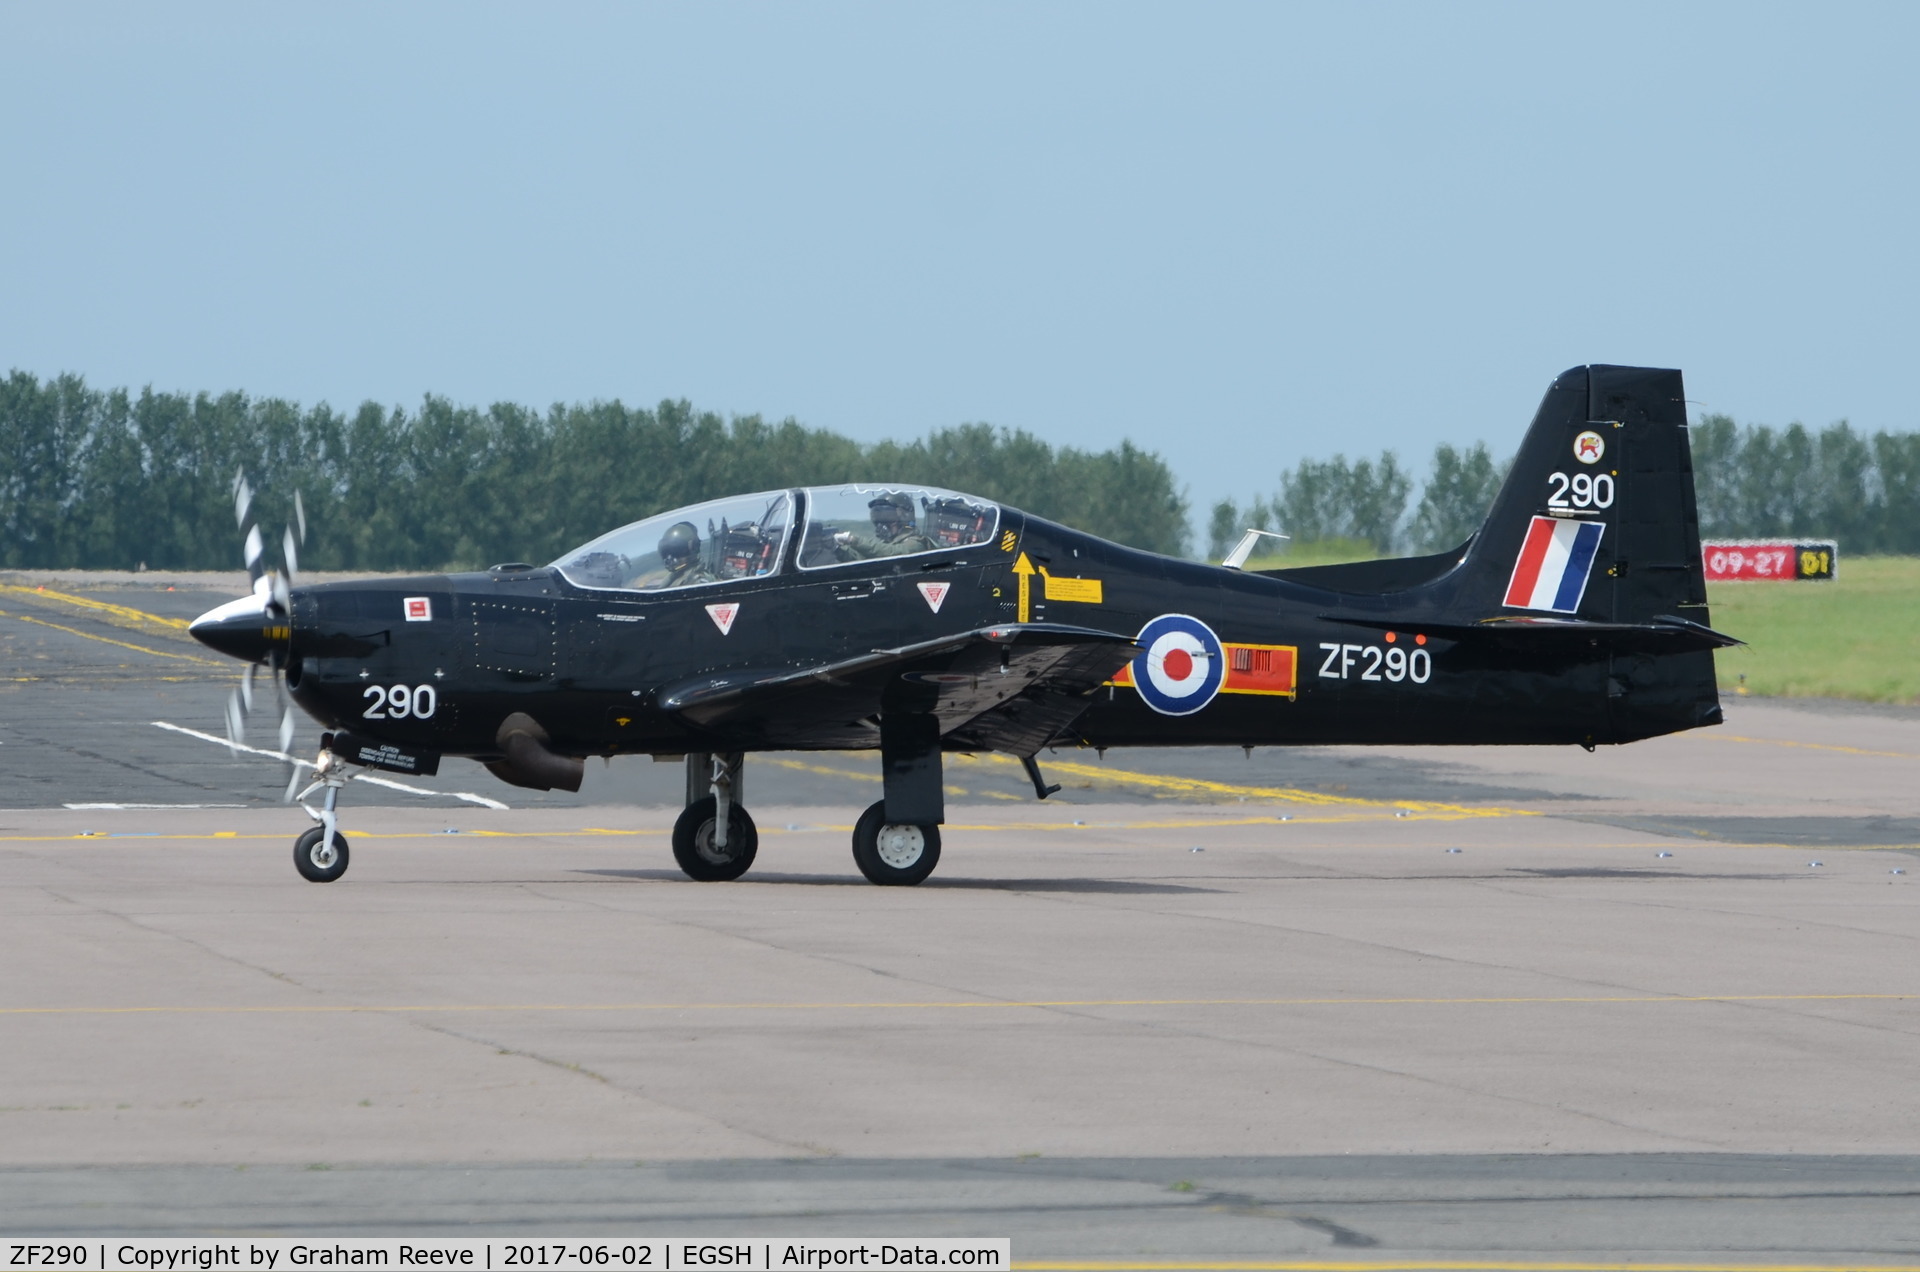 ZF290, 1991 Short S-312 Tucano T1 C/N S088/T61, Just landed at Norwich.